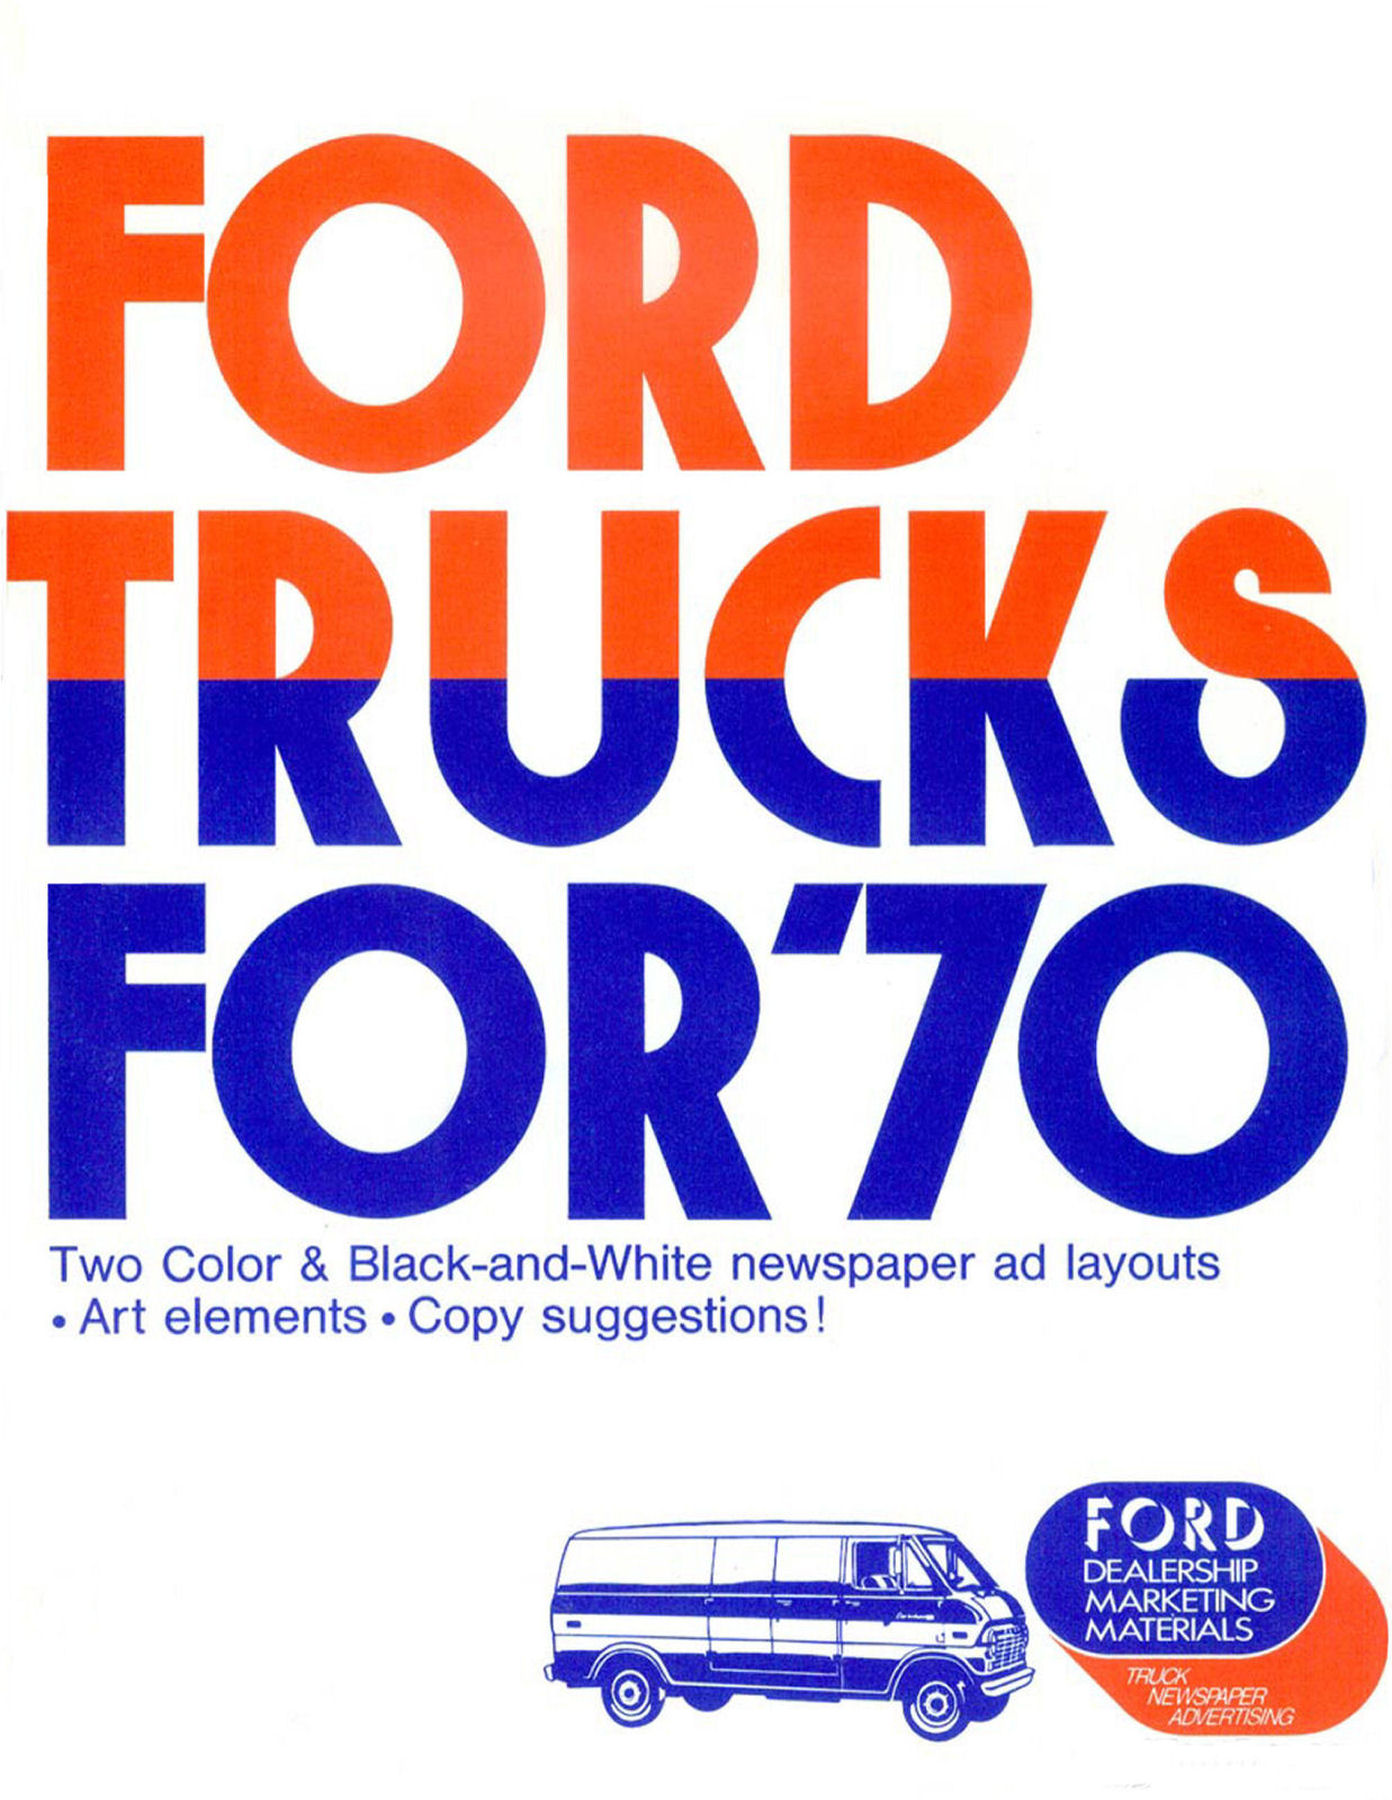 1970 Ford Truck Ad Clipart Book-01